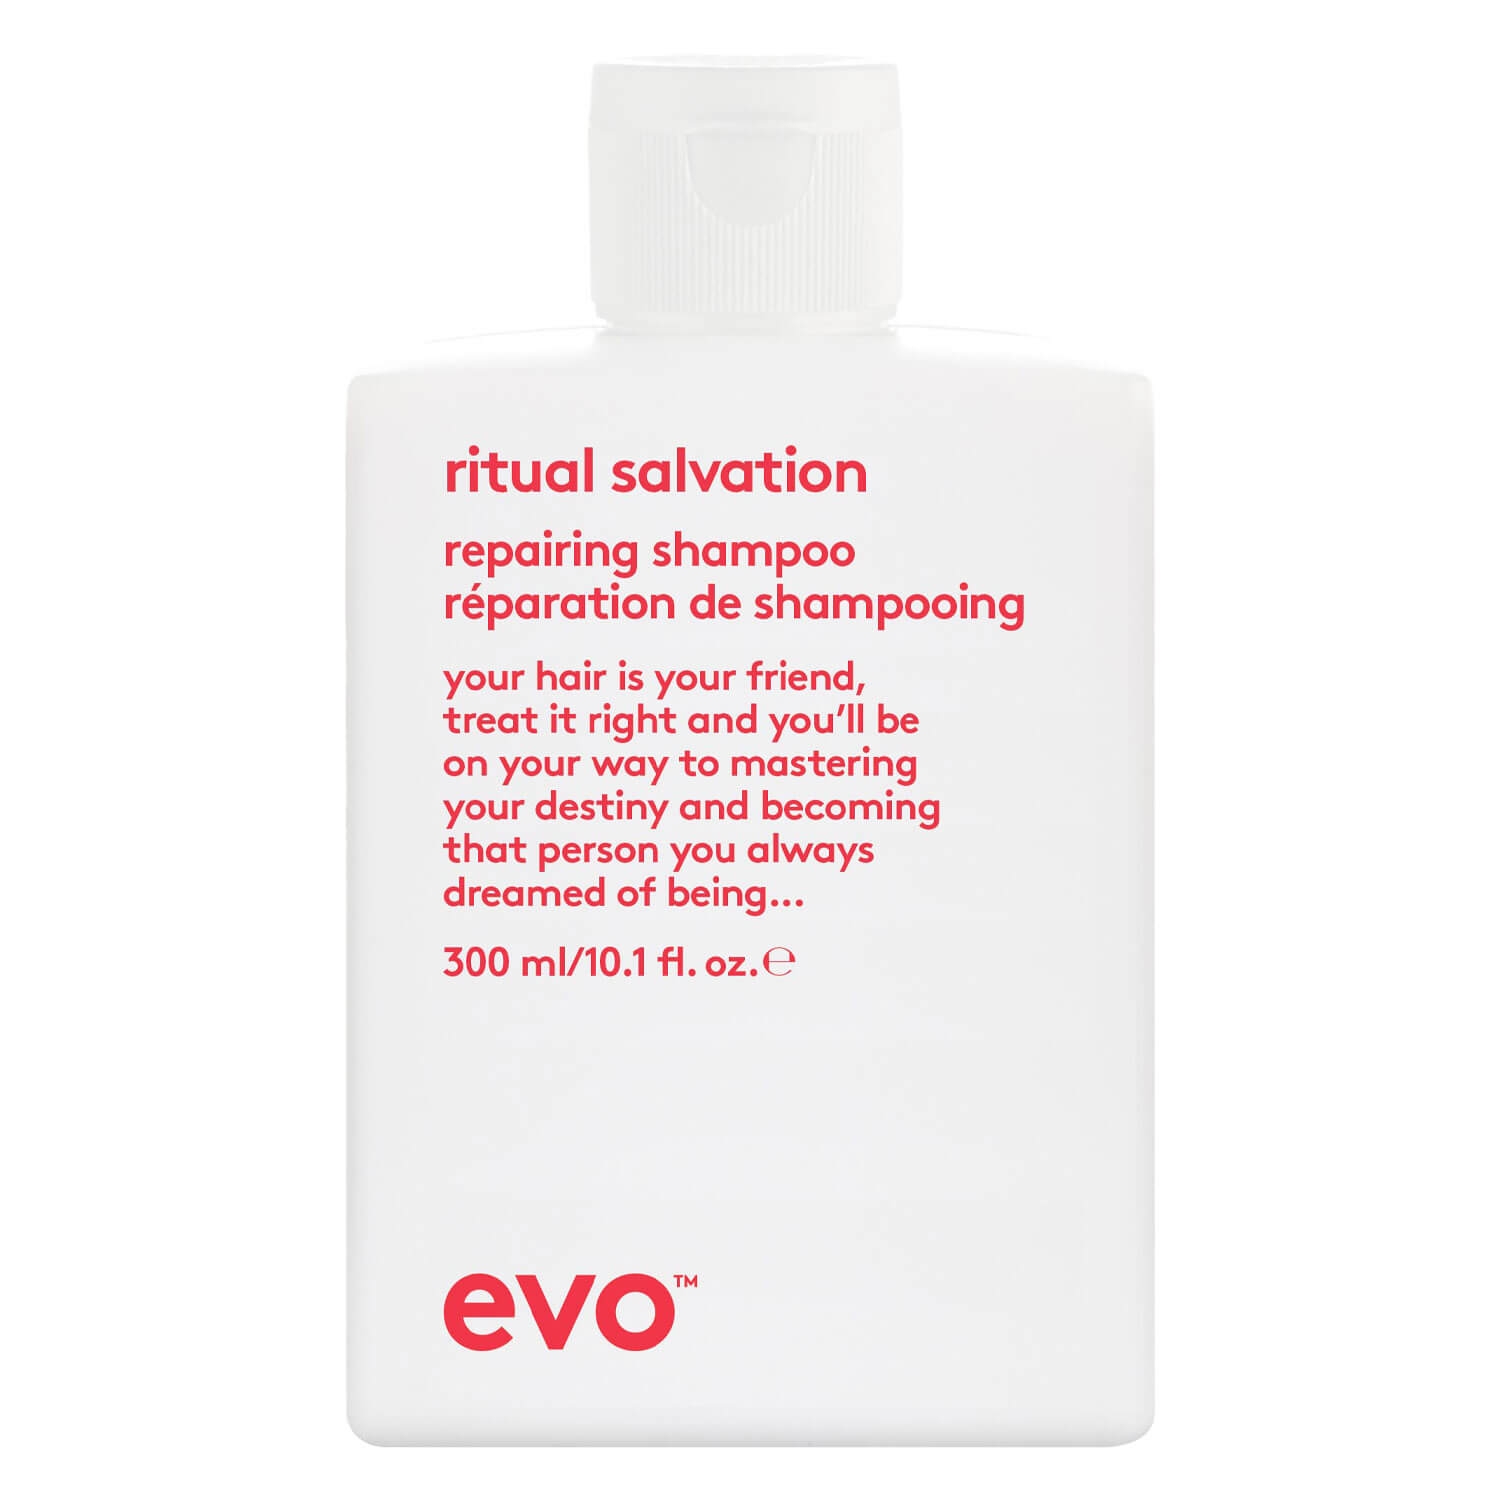 Product image from evo care - ritual salvation repairing shampoo